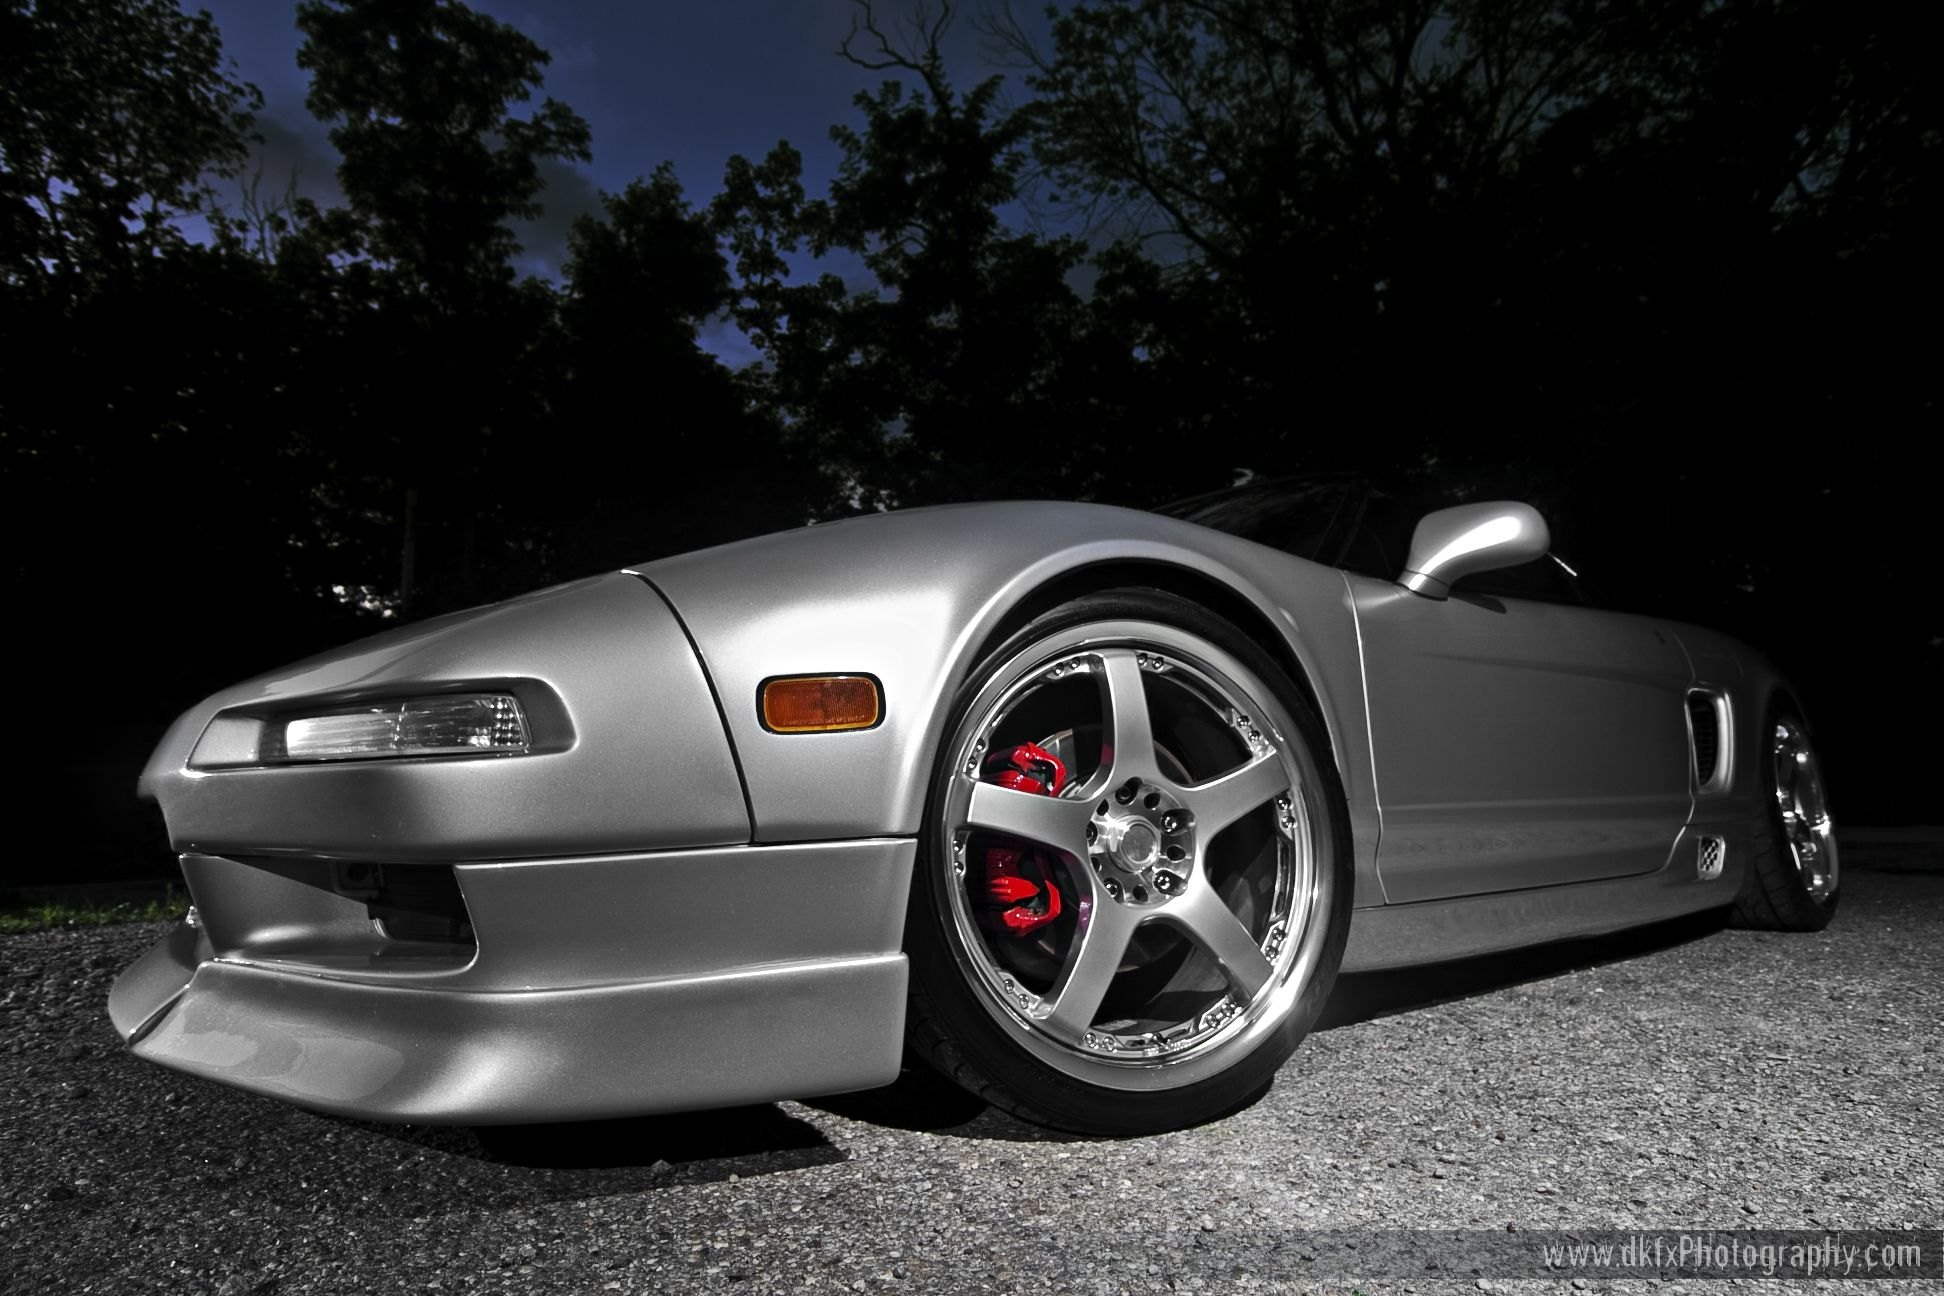 Aftermarket Front Lip on Silver Acura NSX - Photo by dan kinzie